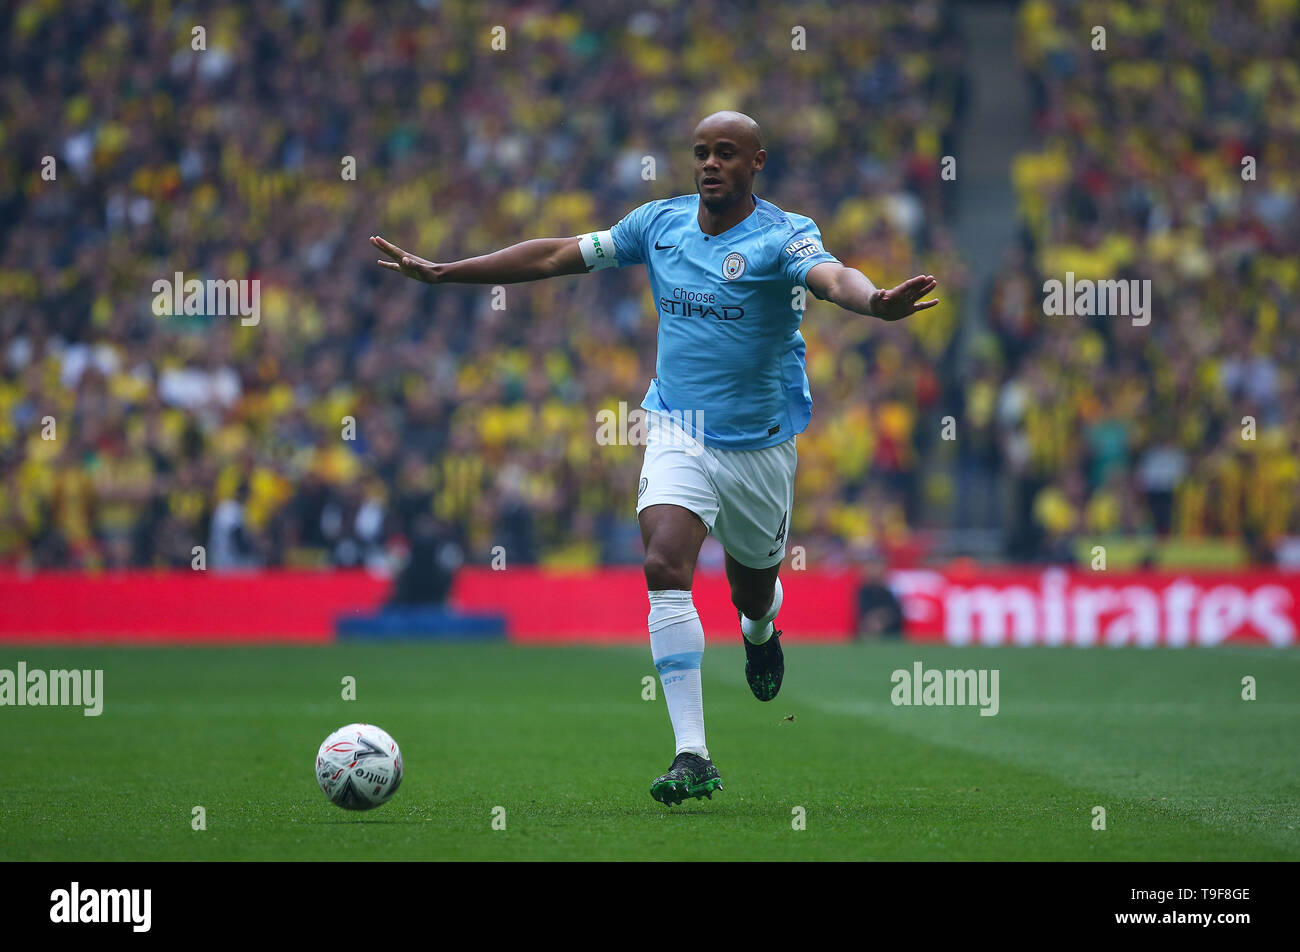 London, UK. 18 May 2019 Manchester City's Vincent Kompany during the Emirates FA Cup Final between Manchester City and Watford at the Wembley Stadium in London. 18 May 2019. EDITORIAL USE ONLY. No use with unauthorized audio, video, data, fixture lists, club/league logos or 'live' services. Online in-match use limited to 120 images, no video emulation. No use in betting, games or single club/league/player publications. Credit: James Boardman / Alamy Live News Stock Photo